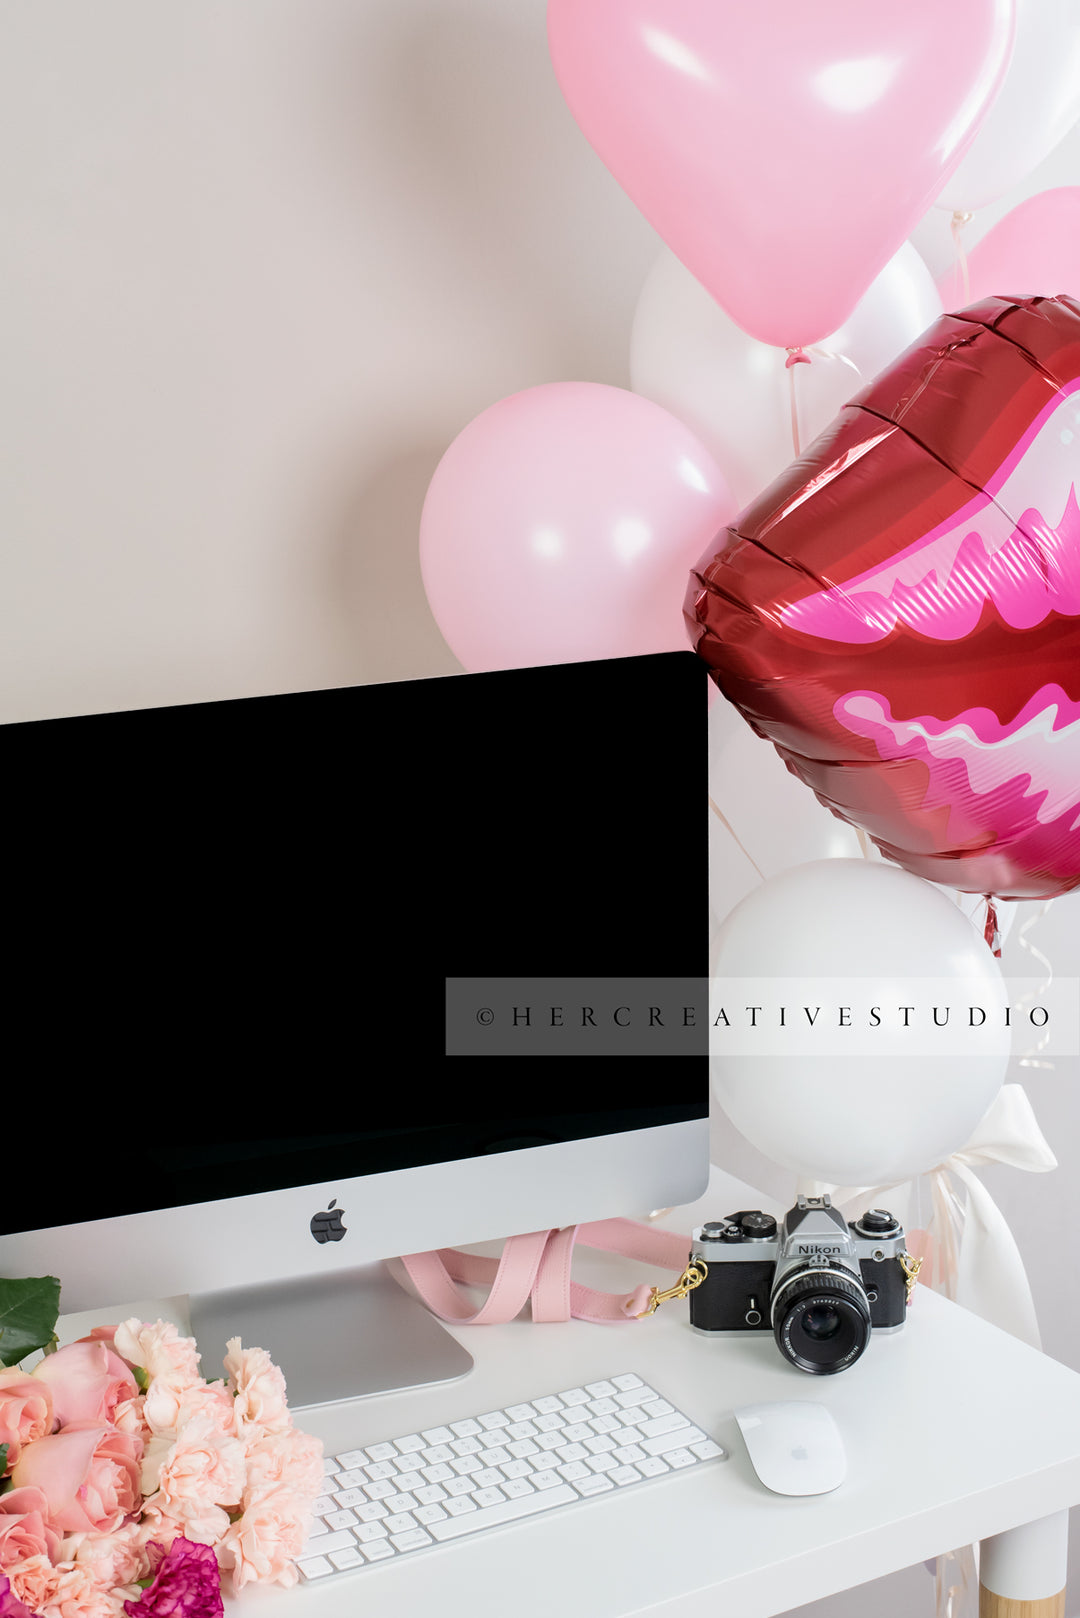 Balloons on Computer Desk, Styled Stock Image